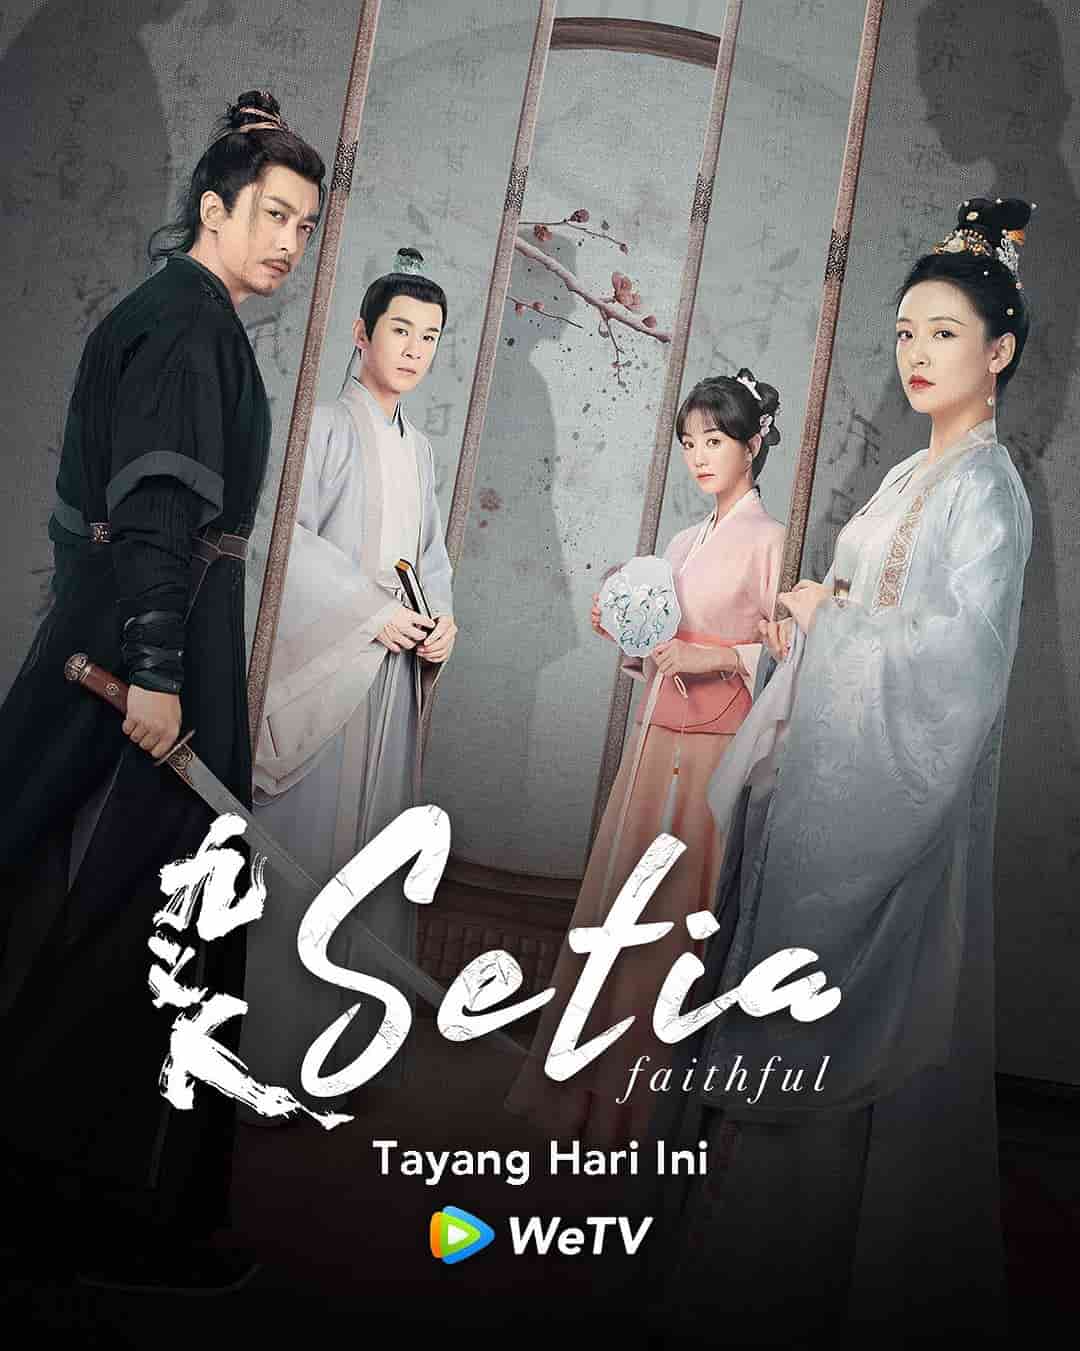 Faithful - Sinopsis, Pemain, OST, Episode, Review